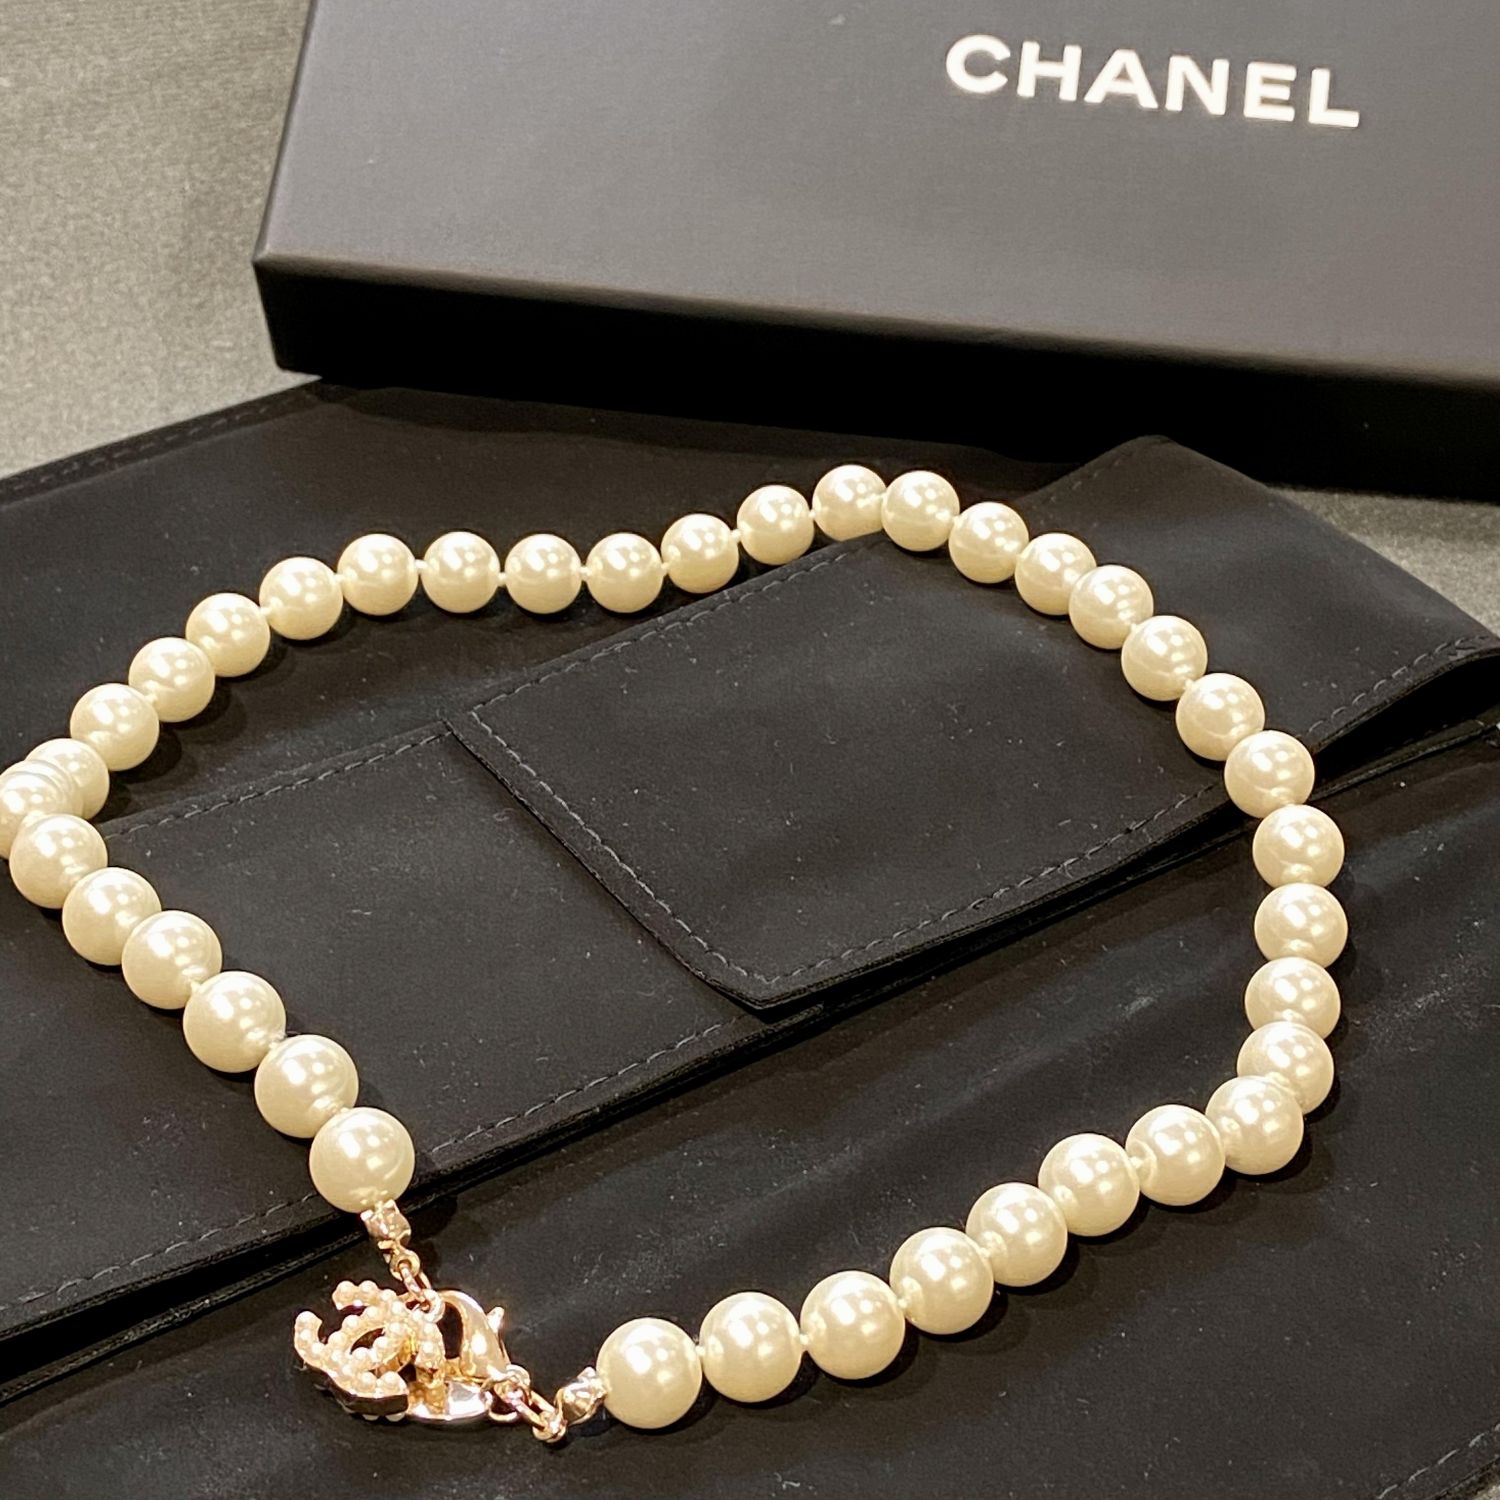 Chanel Pearl Necklace - Jewellery & Gold - Hemswell Antique Centres